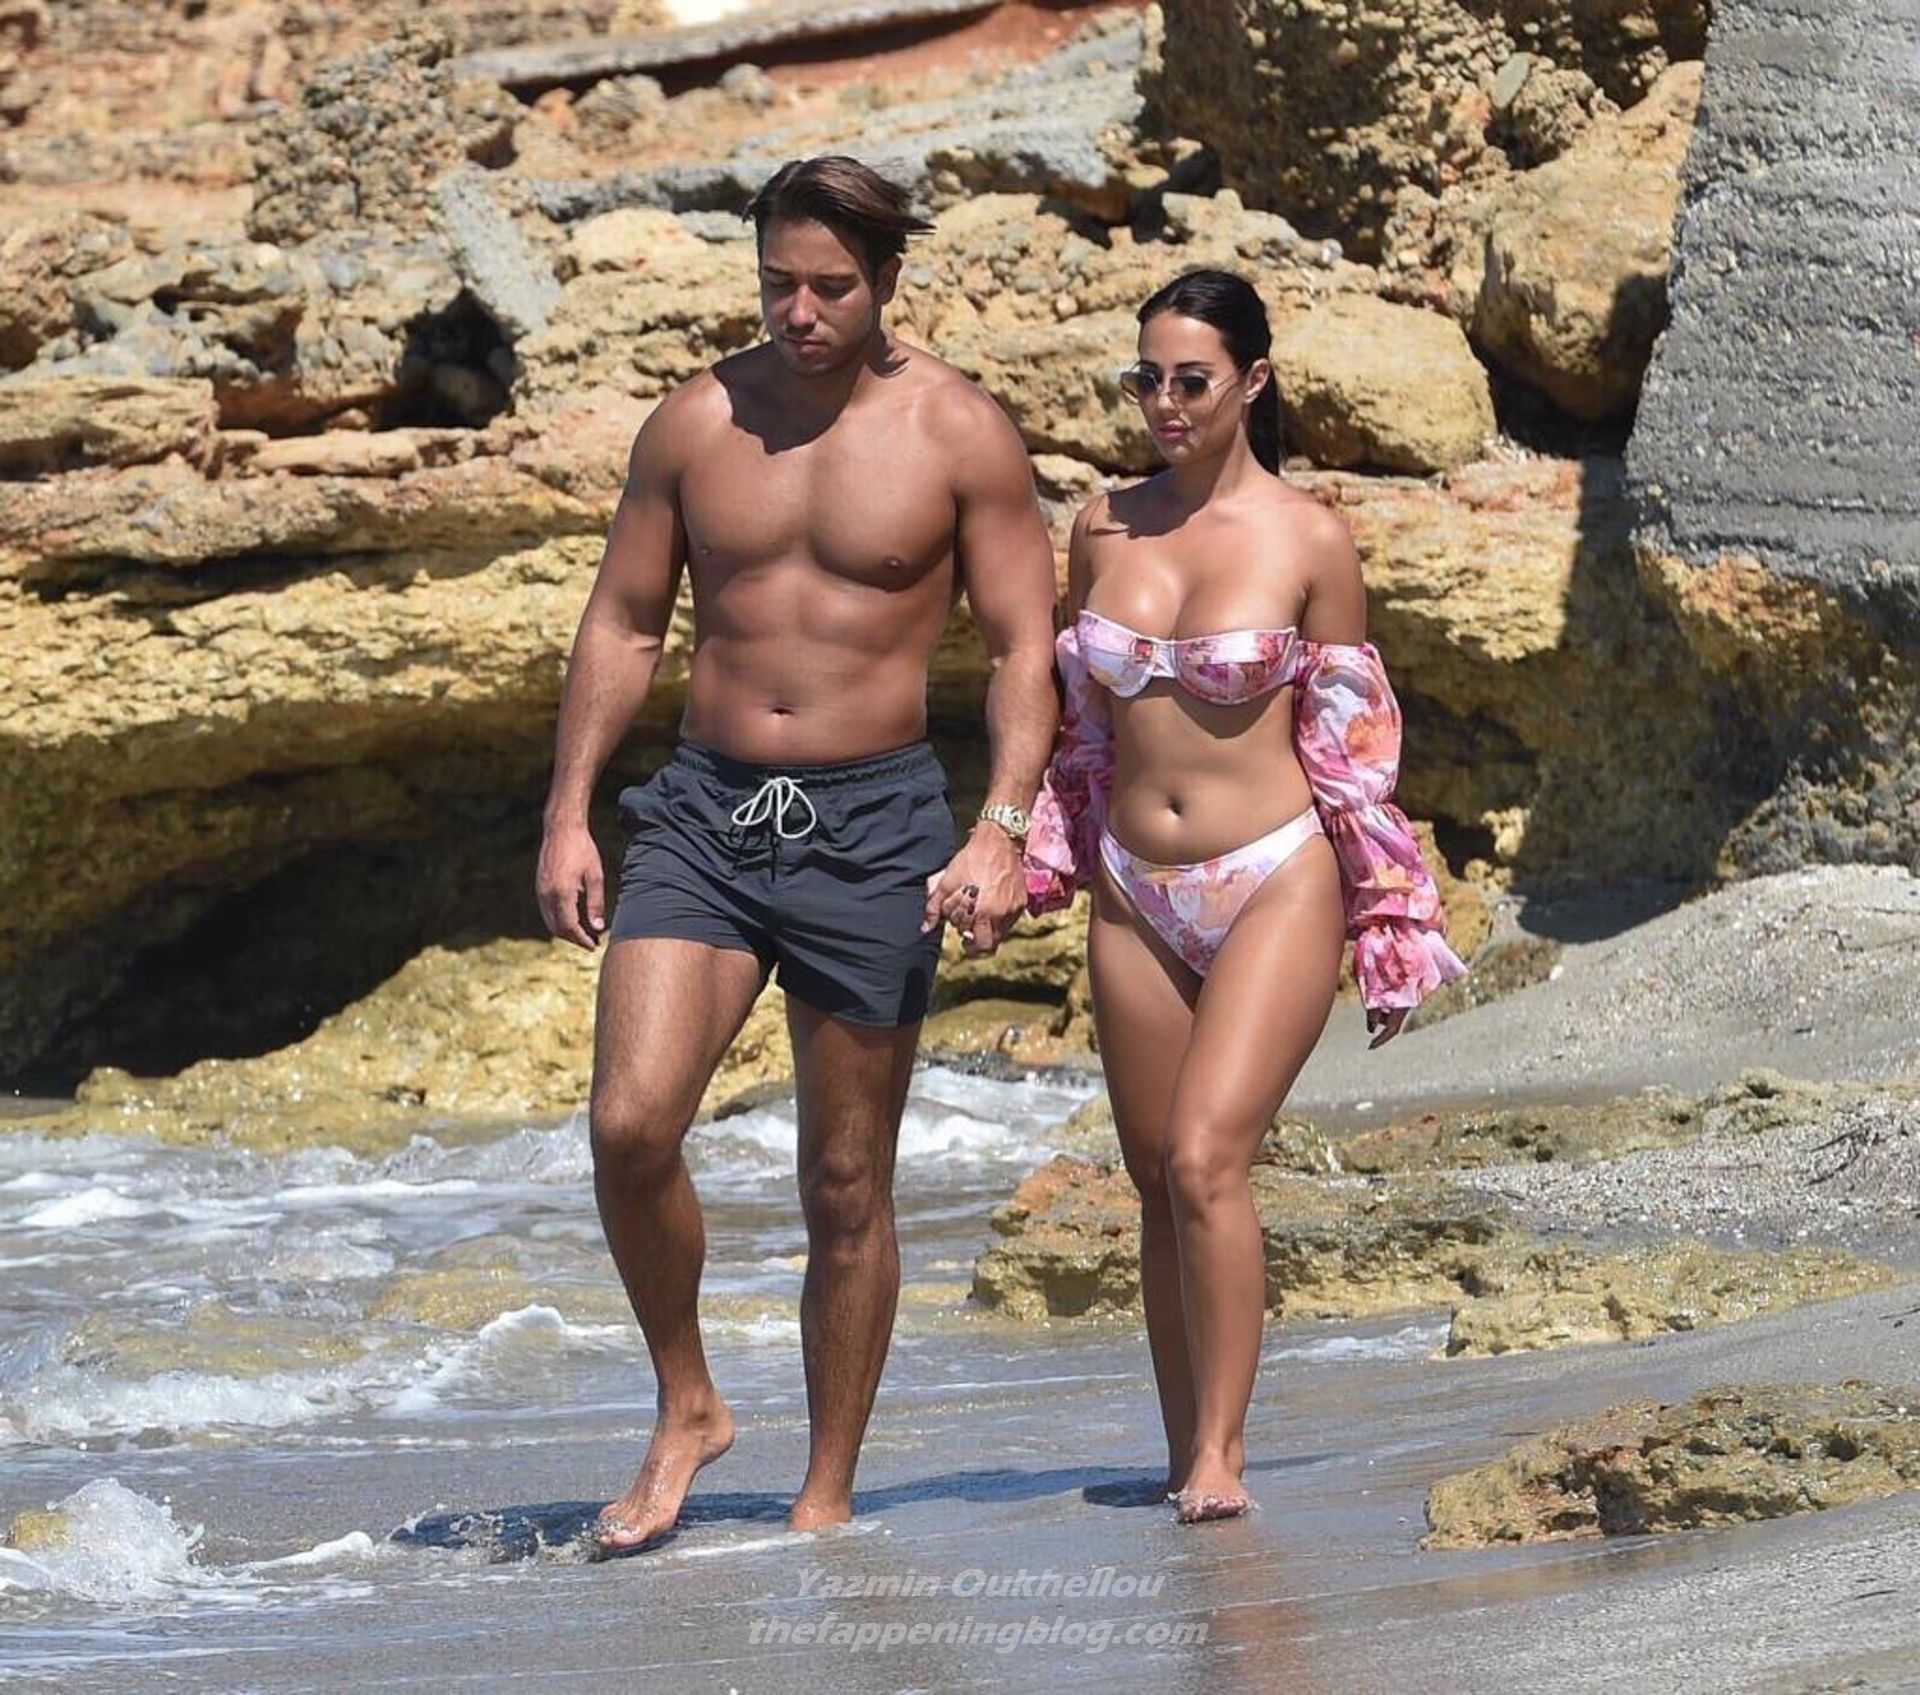 Yazmin Oukhellou & James Lock Are Seen on the Beach in Cyprus (10 Photos)